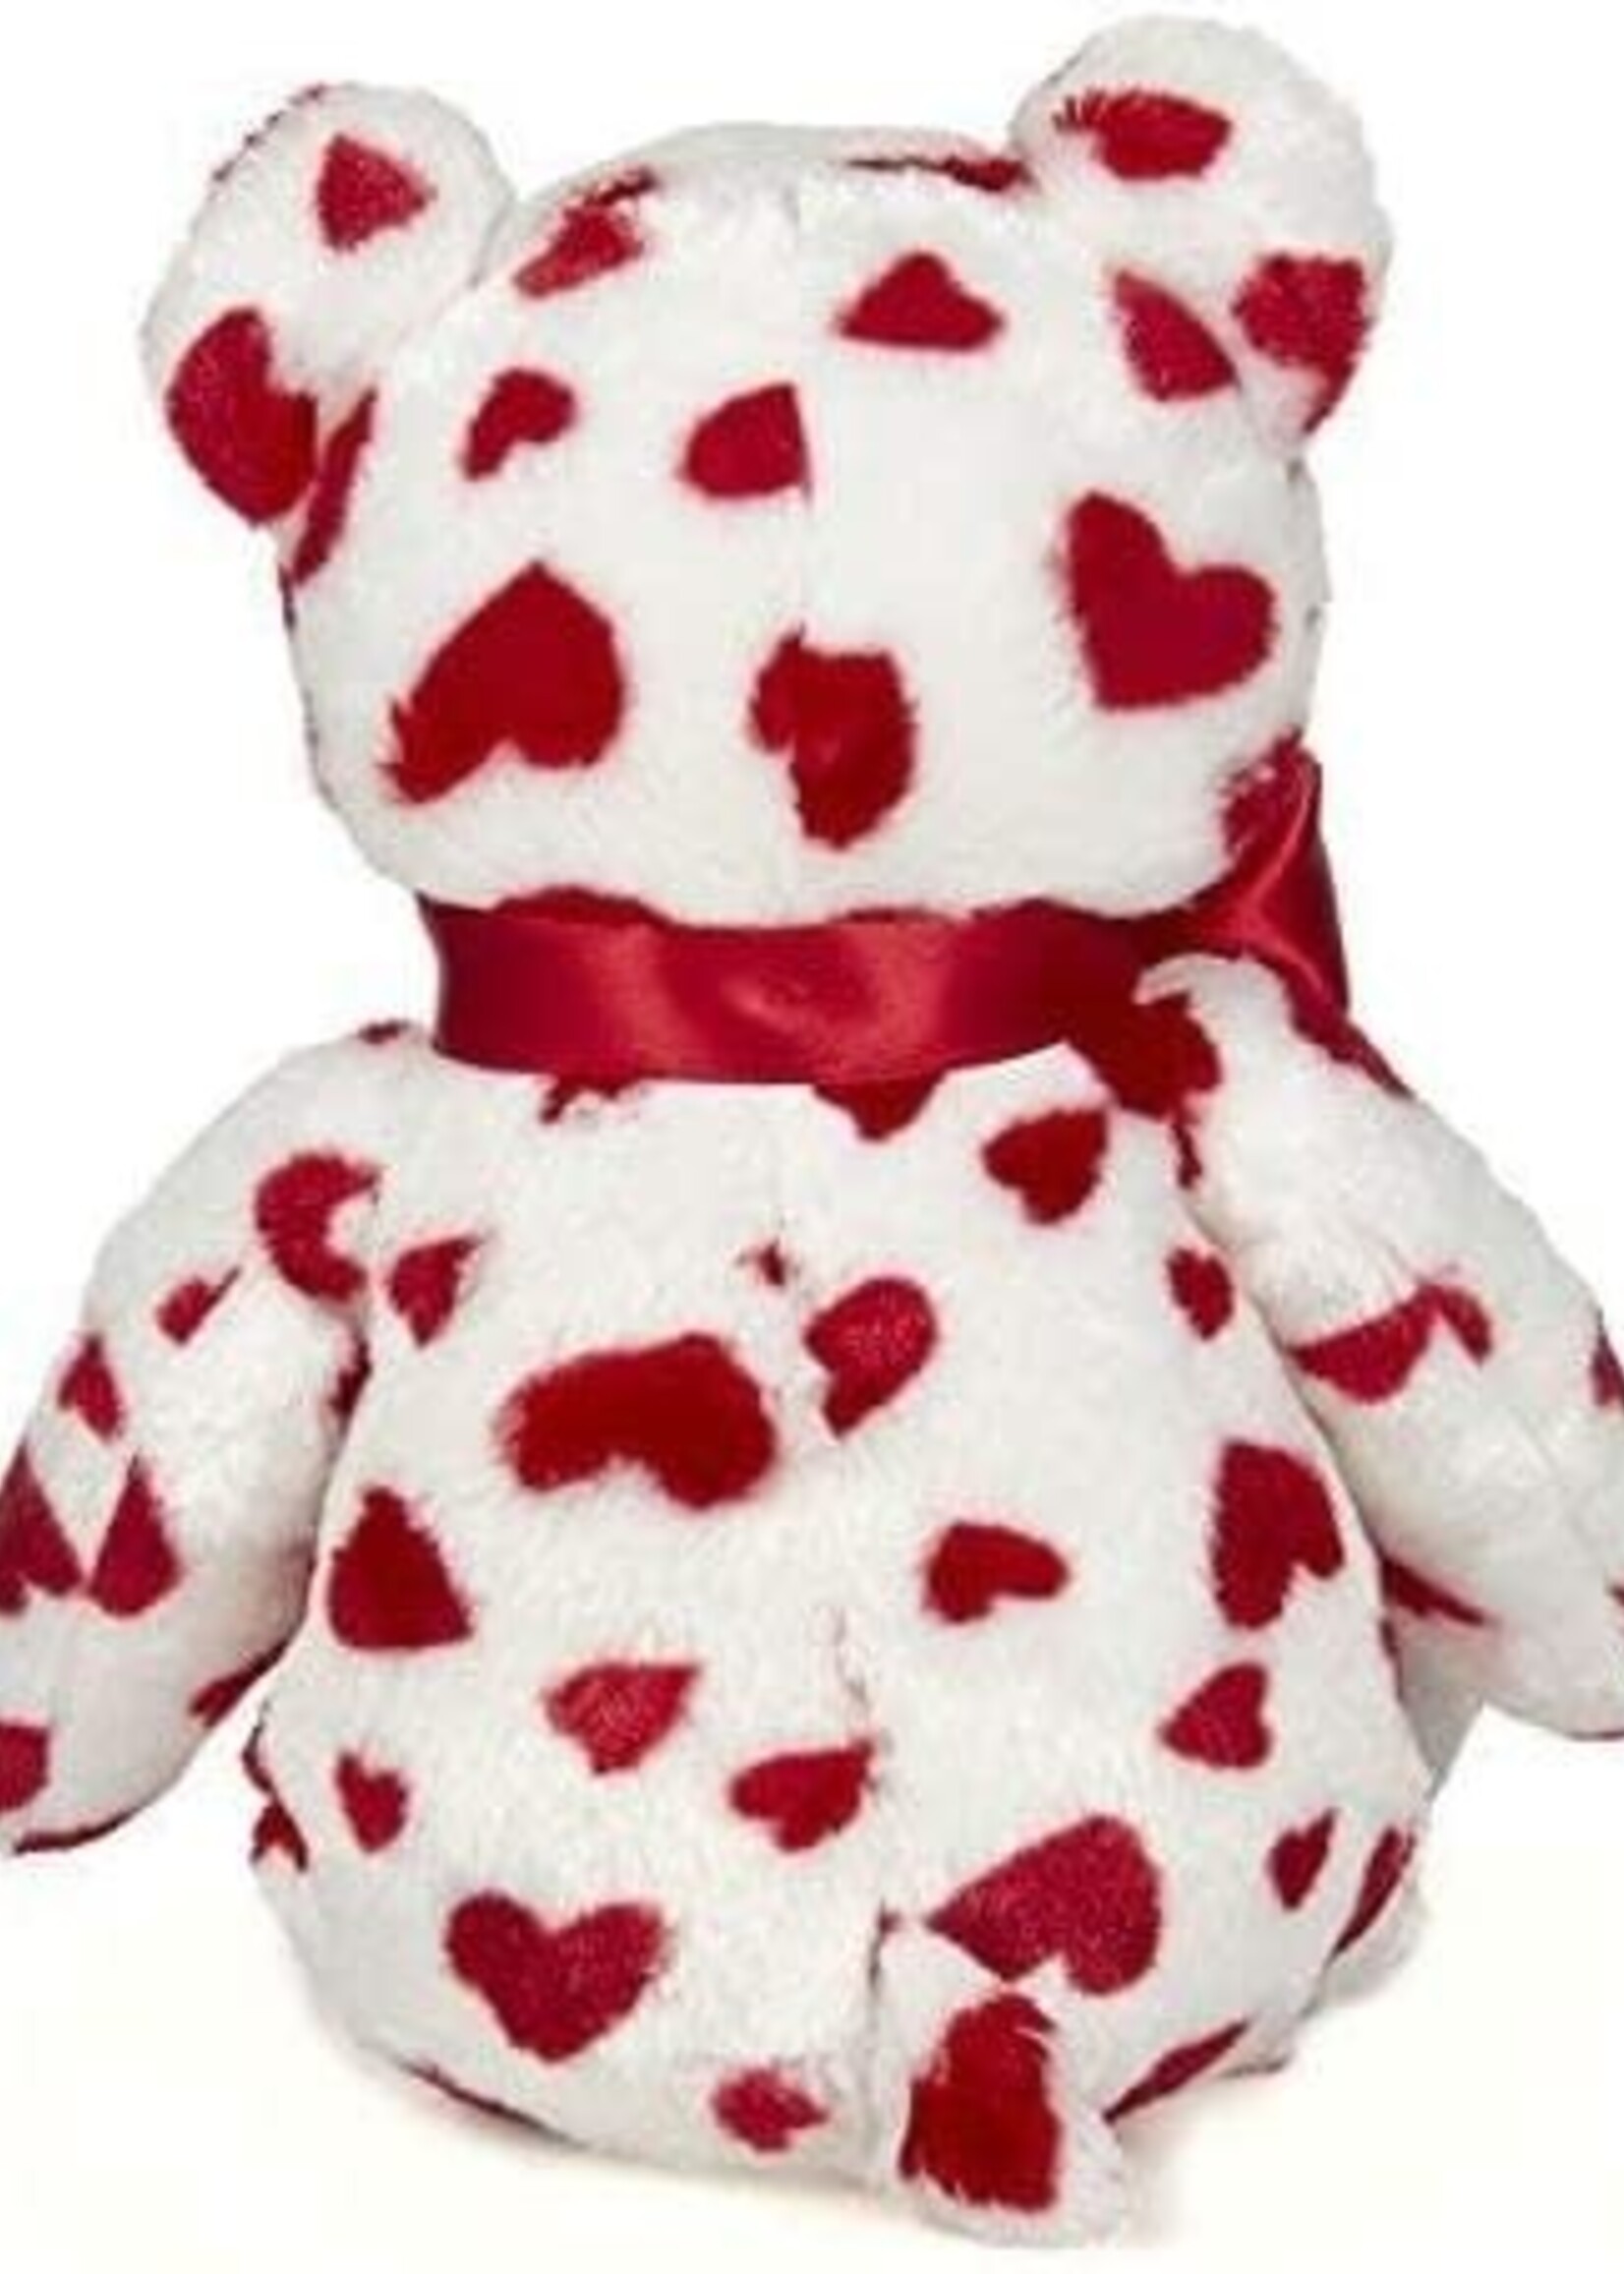 Lil' Cutie White Plush Stuffed Animal Teddy Bear with Hearts, 14 inches